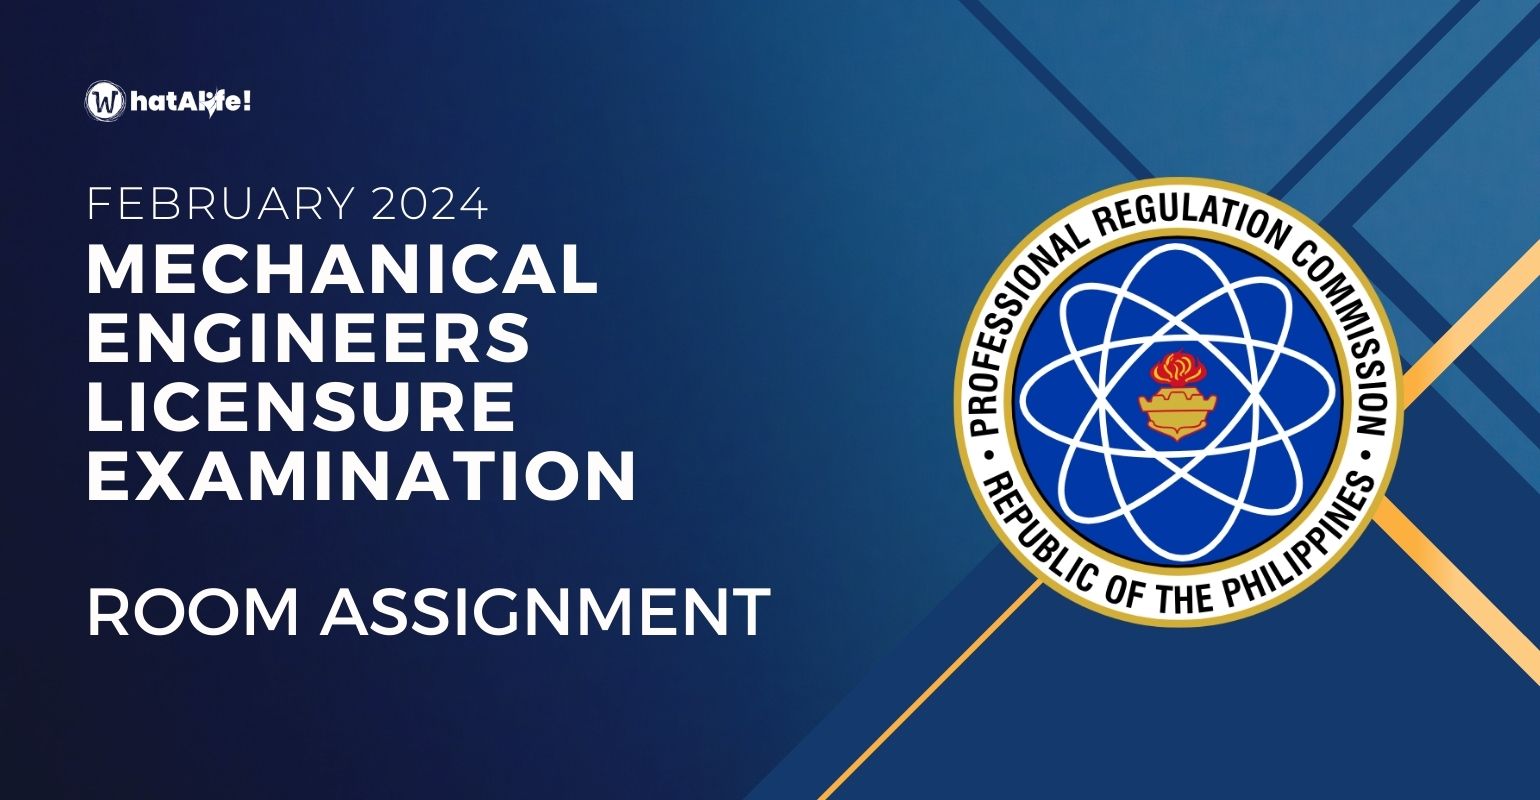 room assignment february 2024 mechanical engineers licensure exam